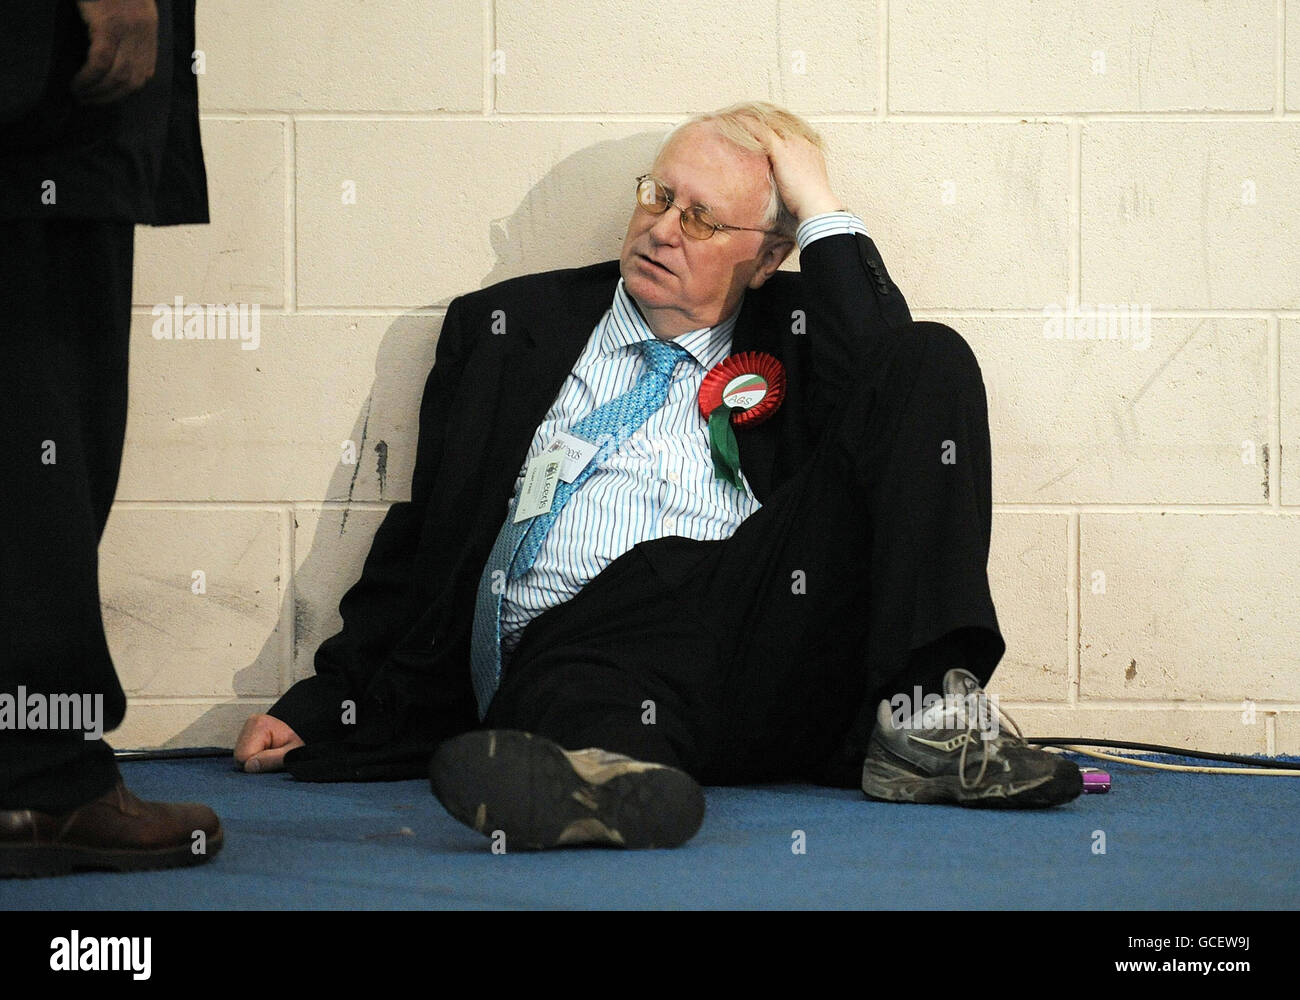 A supporter of the Alliance For Green Socialism party takes a rest during the Leeds electoral counts in the John Charles Sports Centre, Leeds. Stock Photo